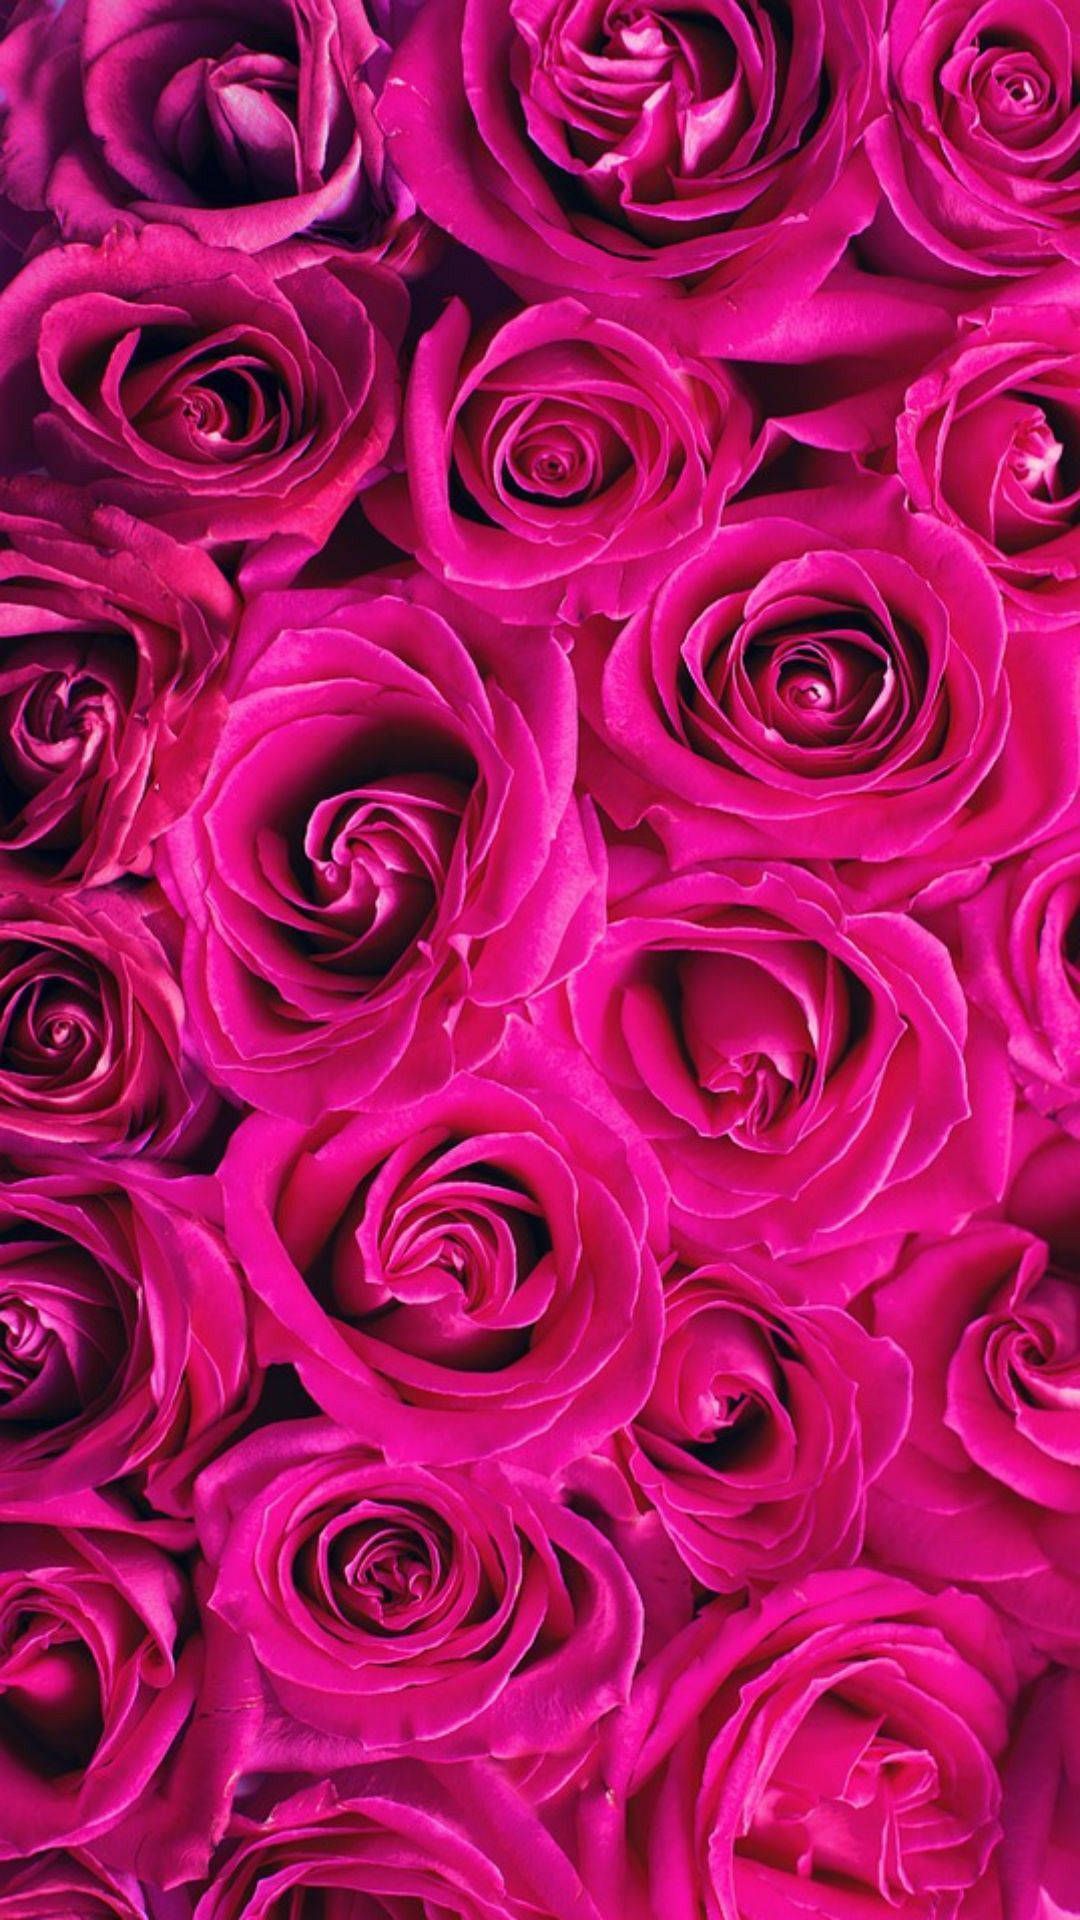 IPhone wallpaper with beautiful pink roses. - Hot pink, pink